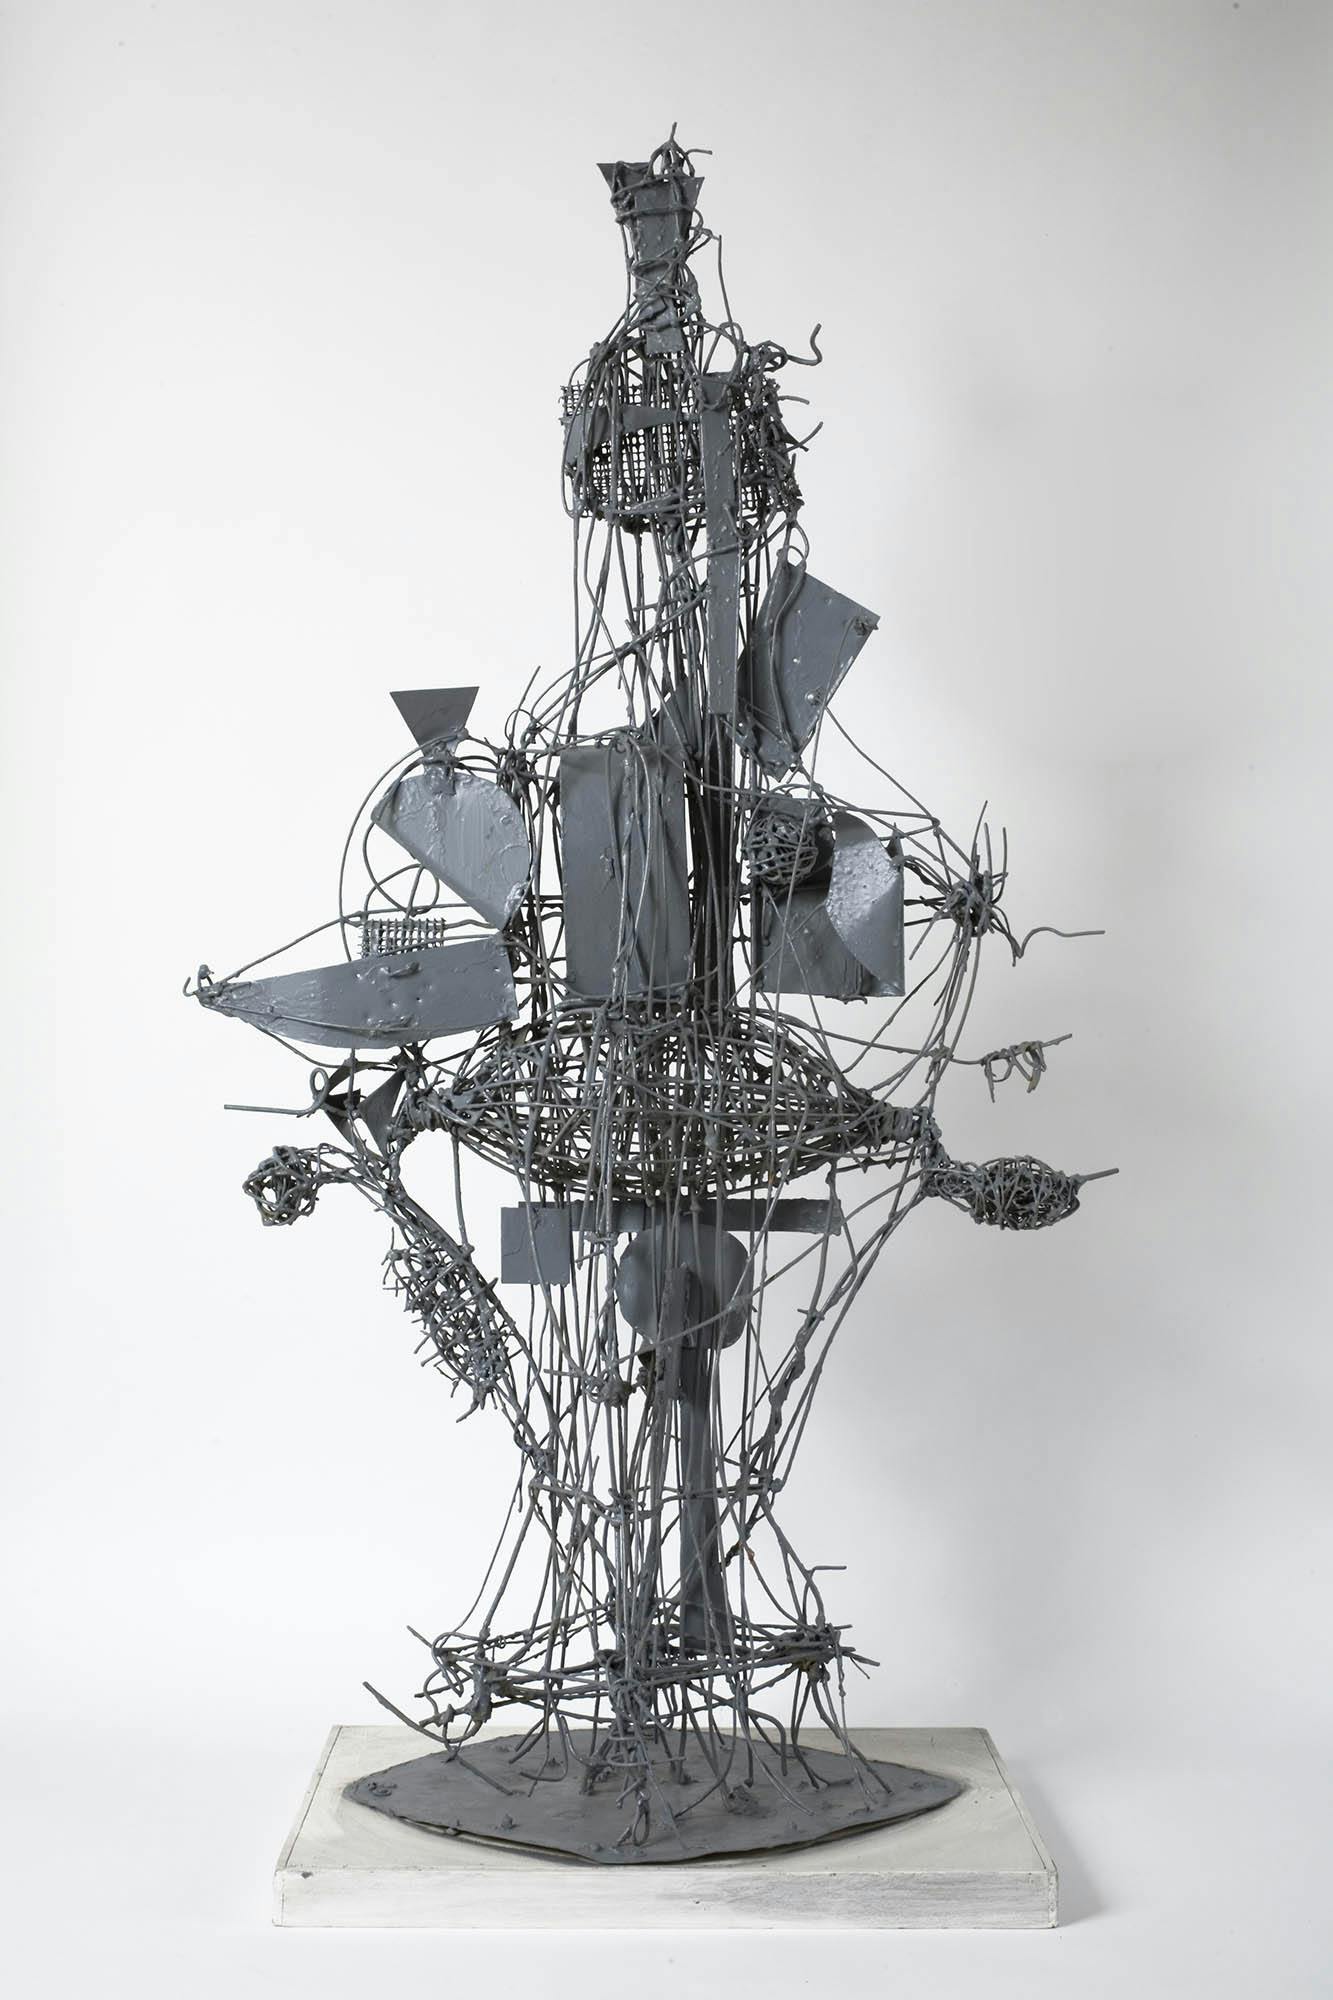 _[Creature of Clouds (Wire Sculpture #3)](https://pousette-dartfoundation.org/works/creature-of-clouds/),_ 1951, steel wire and sheet metal, painted gray, 49 ½ x 28 x 14 in. (125.7 x 71.1 x 35.6 cm)
 – The Richard Pousette-Dart Foundation